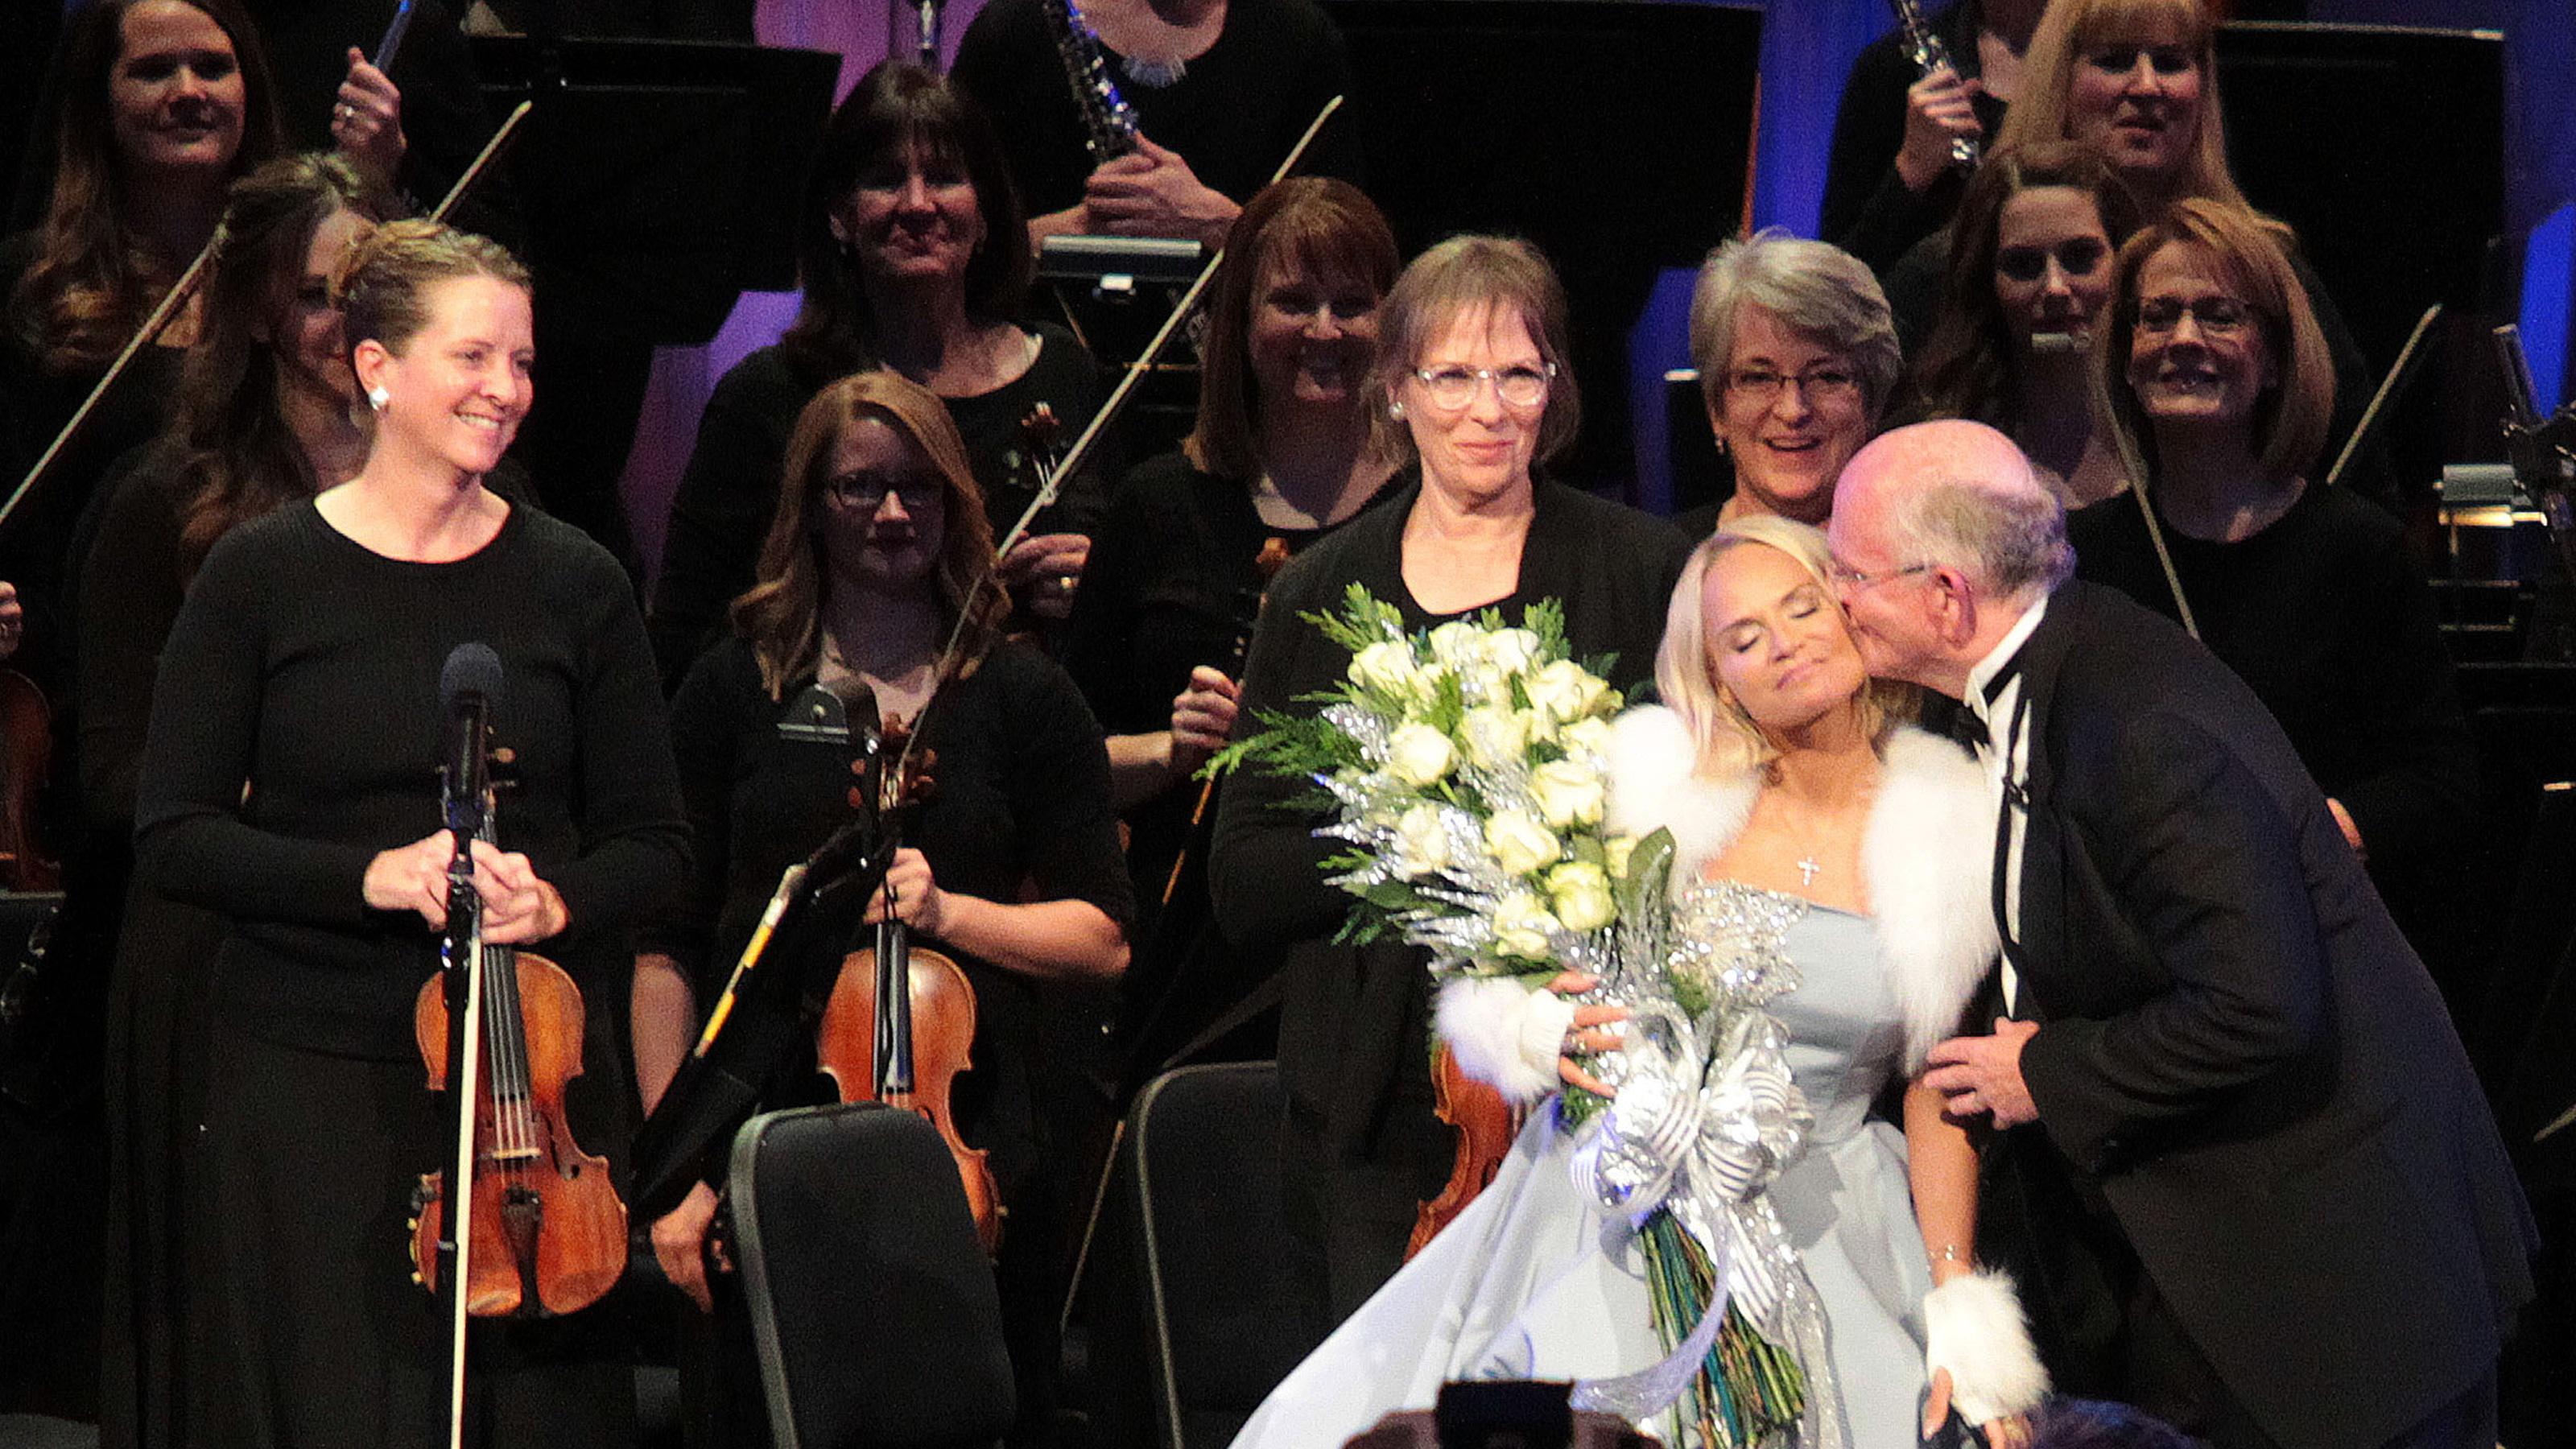 Musicians stand in the background while Mack Wilberg kisses Kristin Chenoweth on the cheek in front of them.